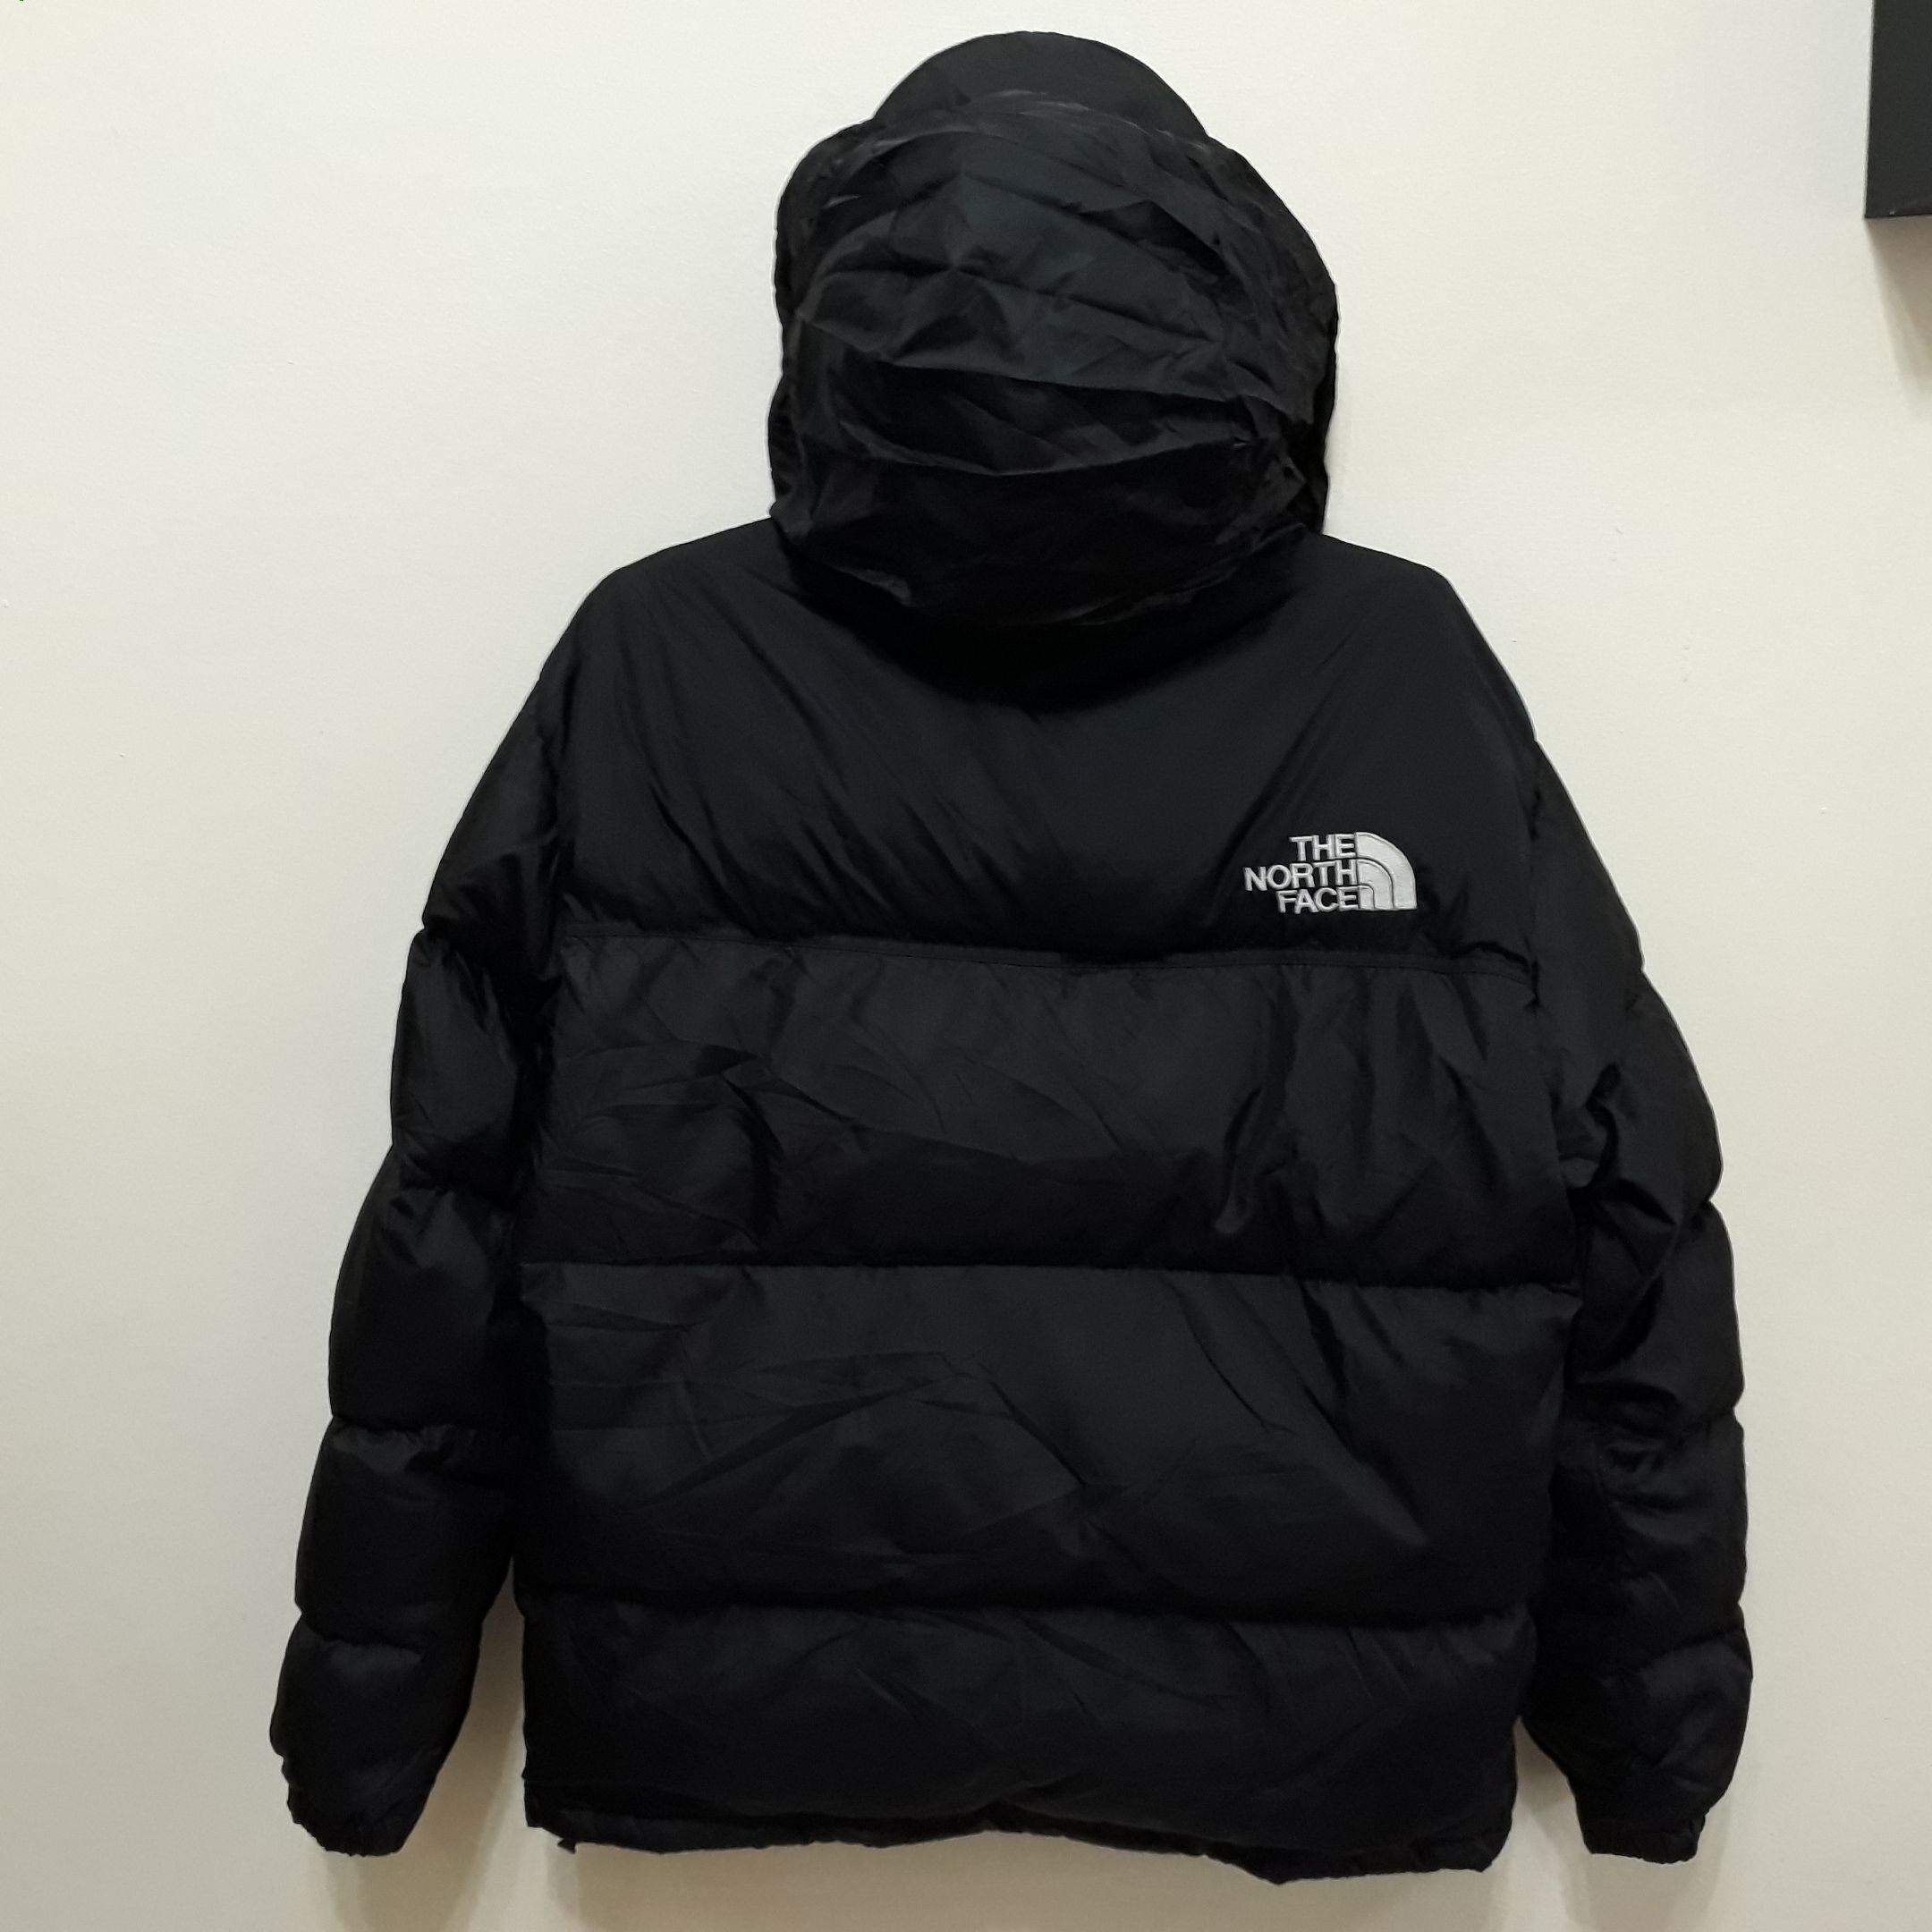 The North Face The North Face Limited Edition Winter 2011 Goose Down Summit Series 850Ltd Puffer Quilted Bomber Jacket Hoodie Size US M / EU 48-50 / 2 - 3 Thumbnail